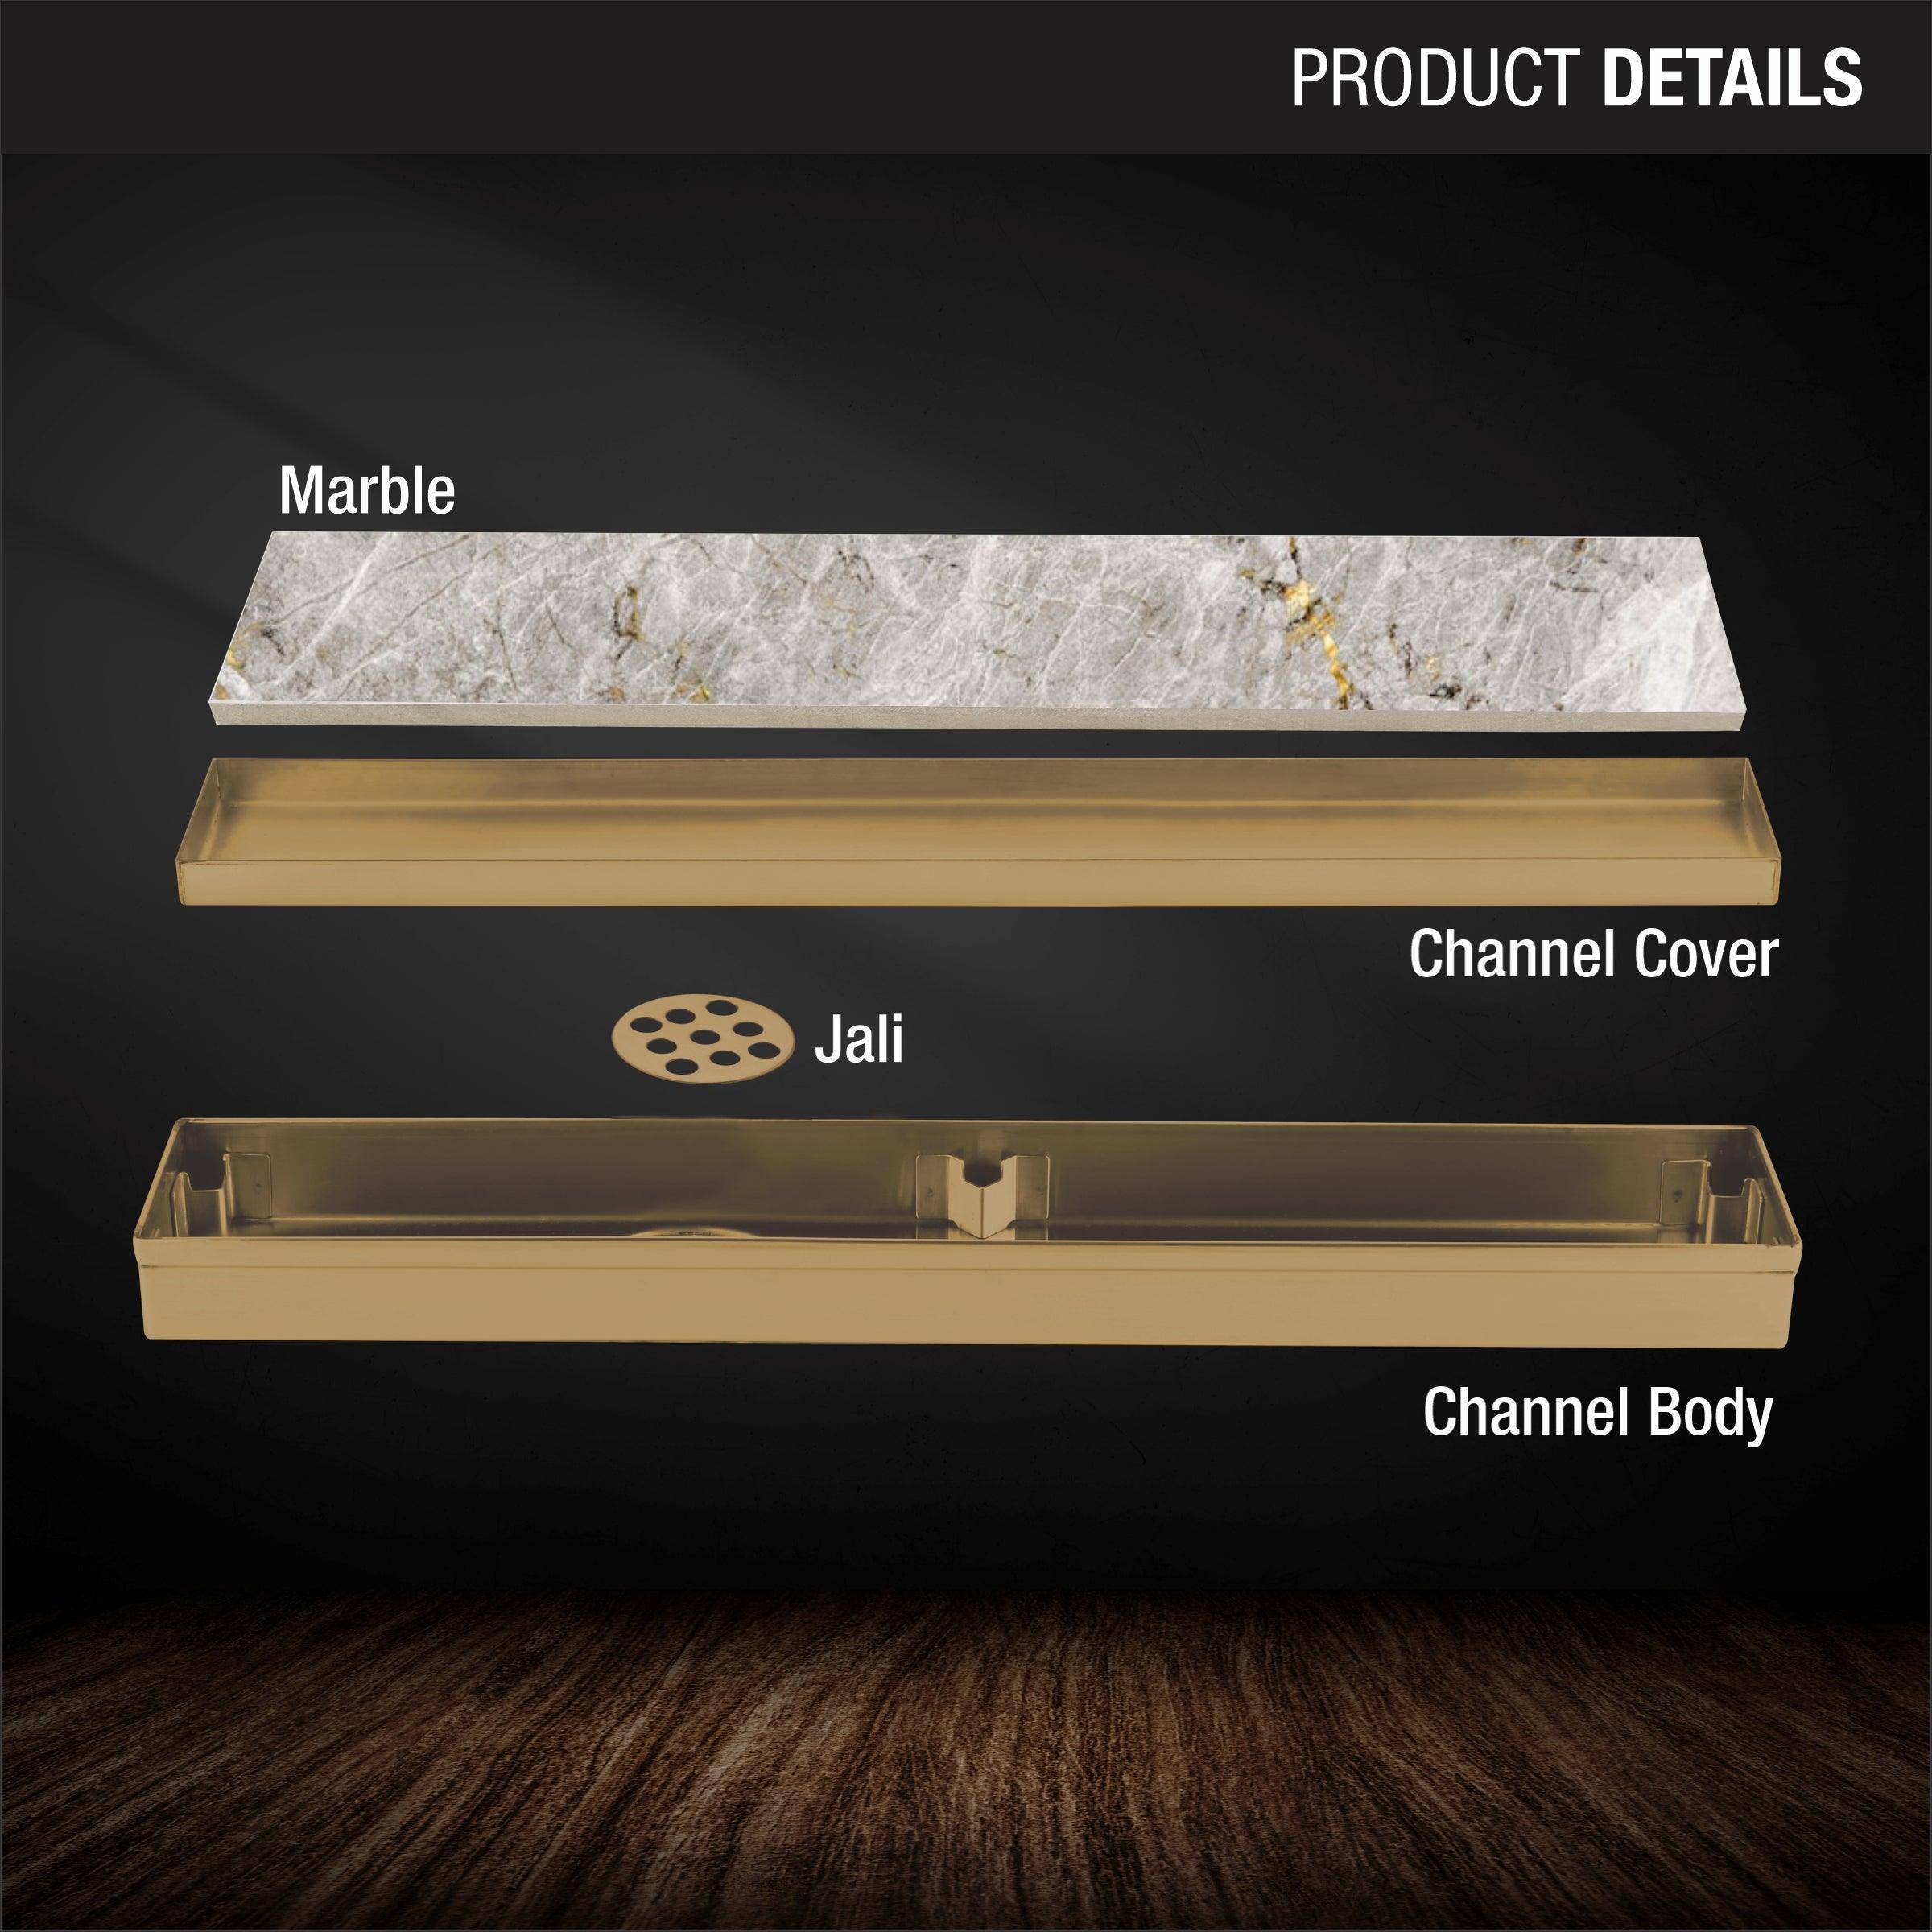 Marble Insert Shower Drain Channel - Yellow Gold (24 x 2 Inches) product details